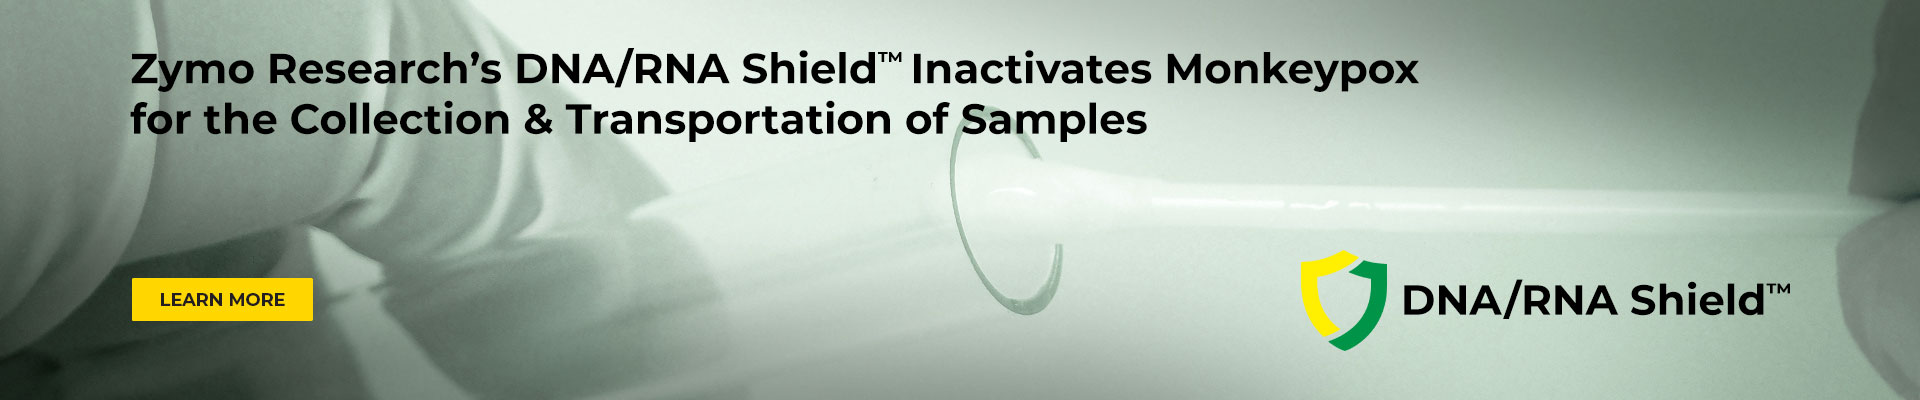 Banner for Shield Inactivates Monkeypox Landing Page